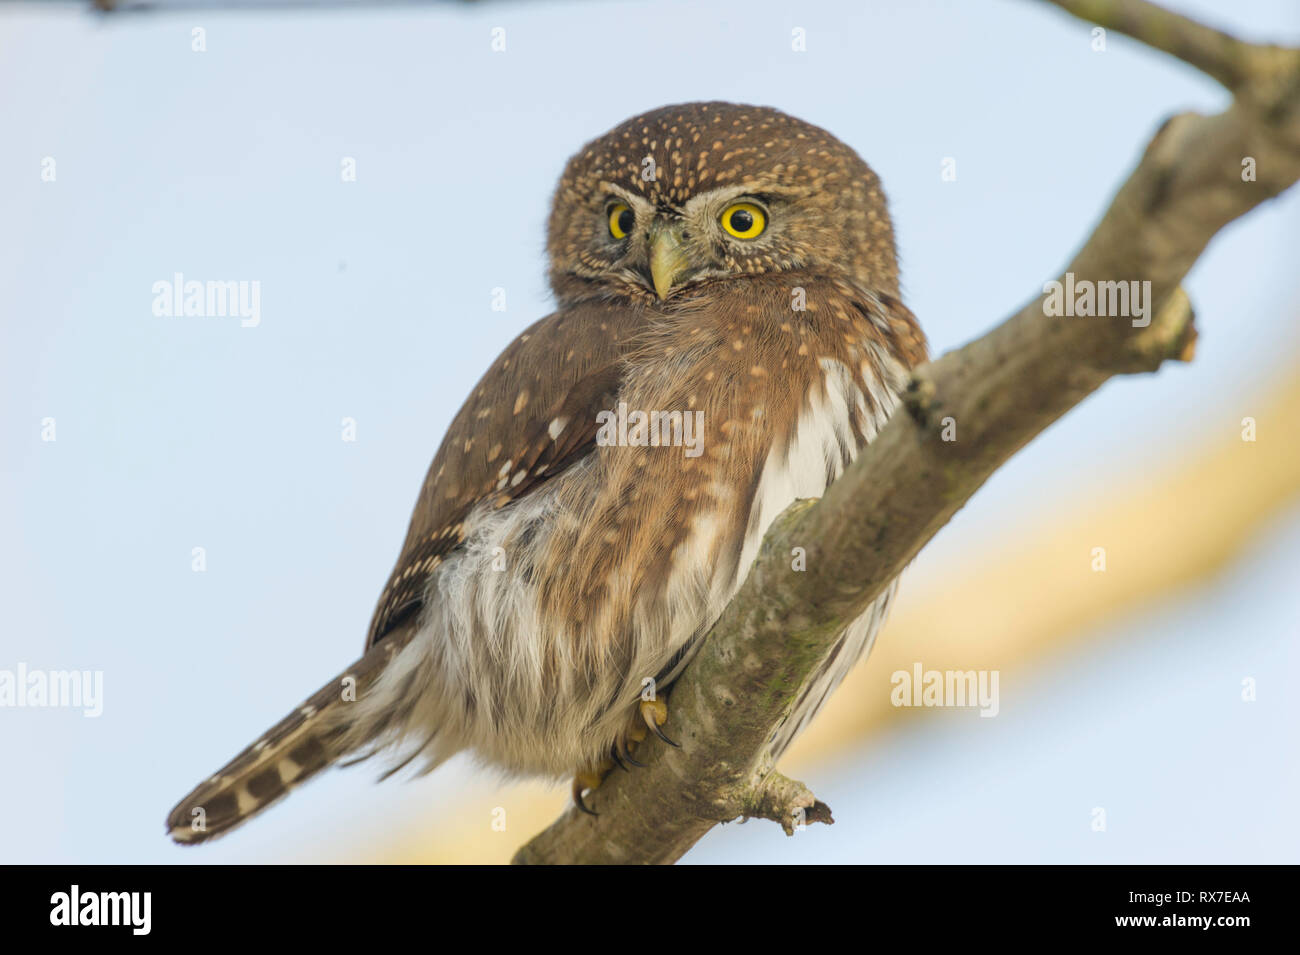 The Northern Pygmy-Owl may be tiny, but it’s a ferocious hunter with a taste for songbirds. These owls are mostly dark brown and white, with long tails, smoothly rounded heads, and piercing yellow eyes. They hunt during the day by sitting quietly and surprising their prey. Stock Photo